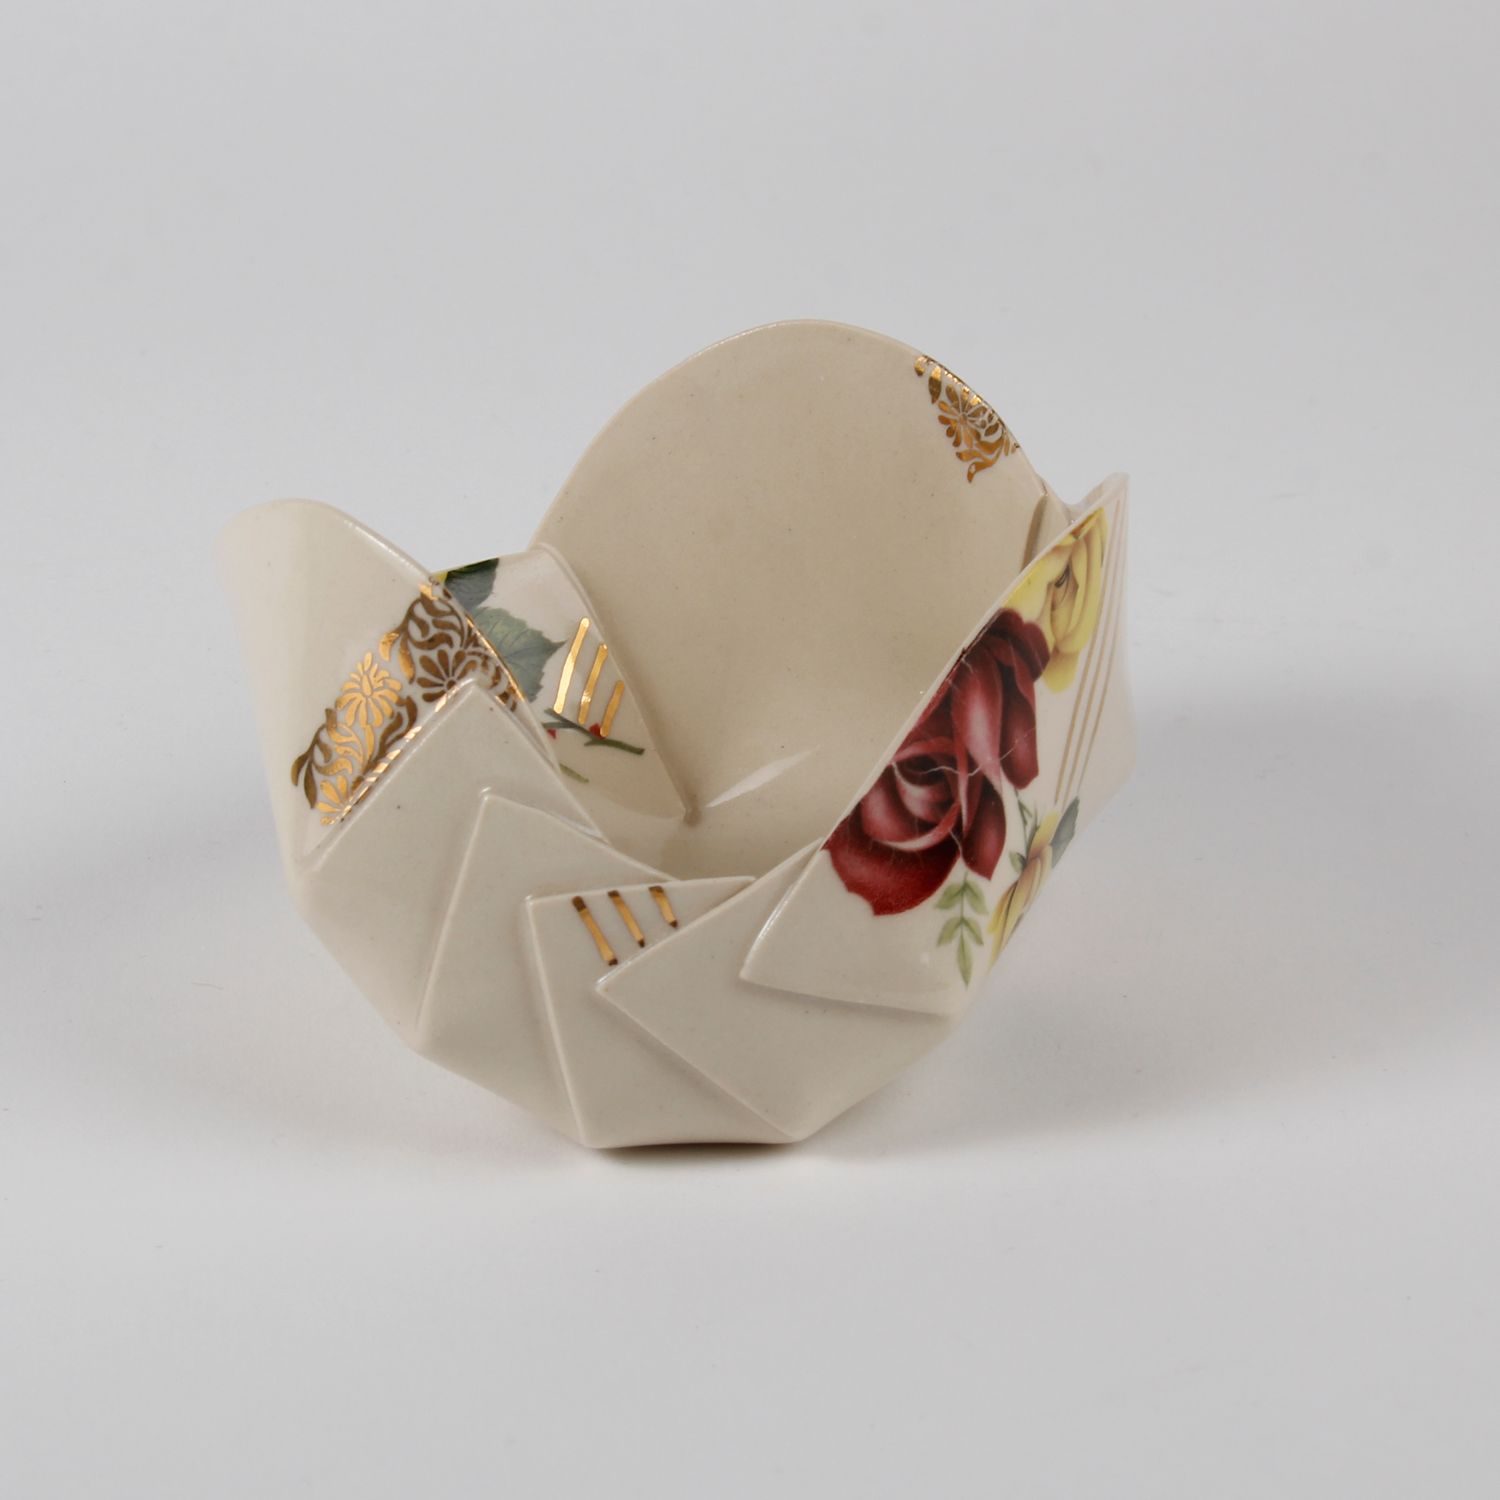 Natalie Waddell: X-Large Floral Bowl Product Image 5 of 7